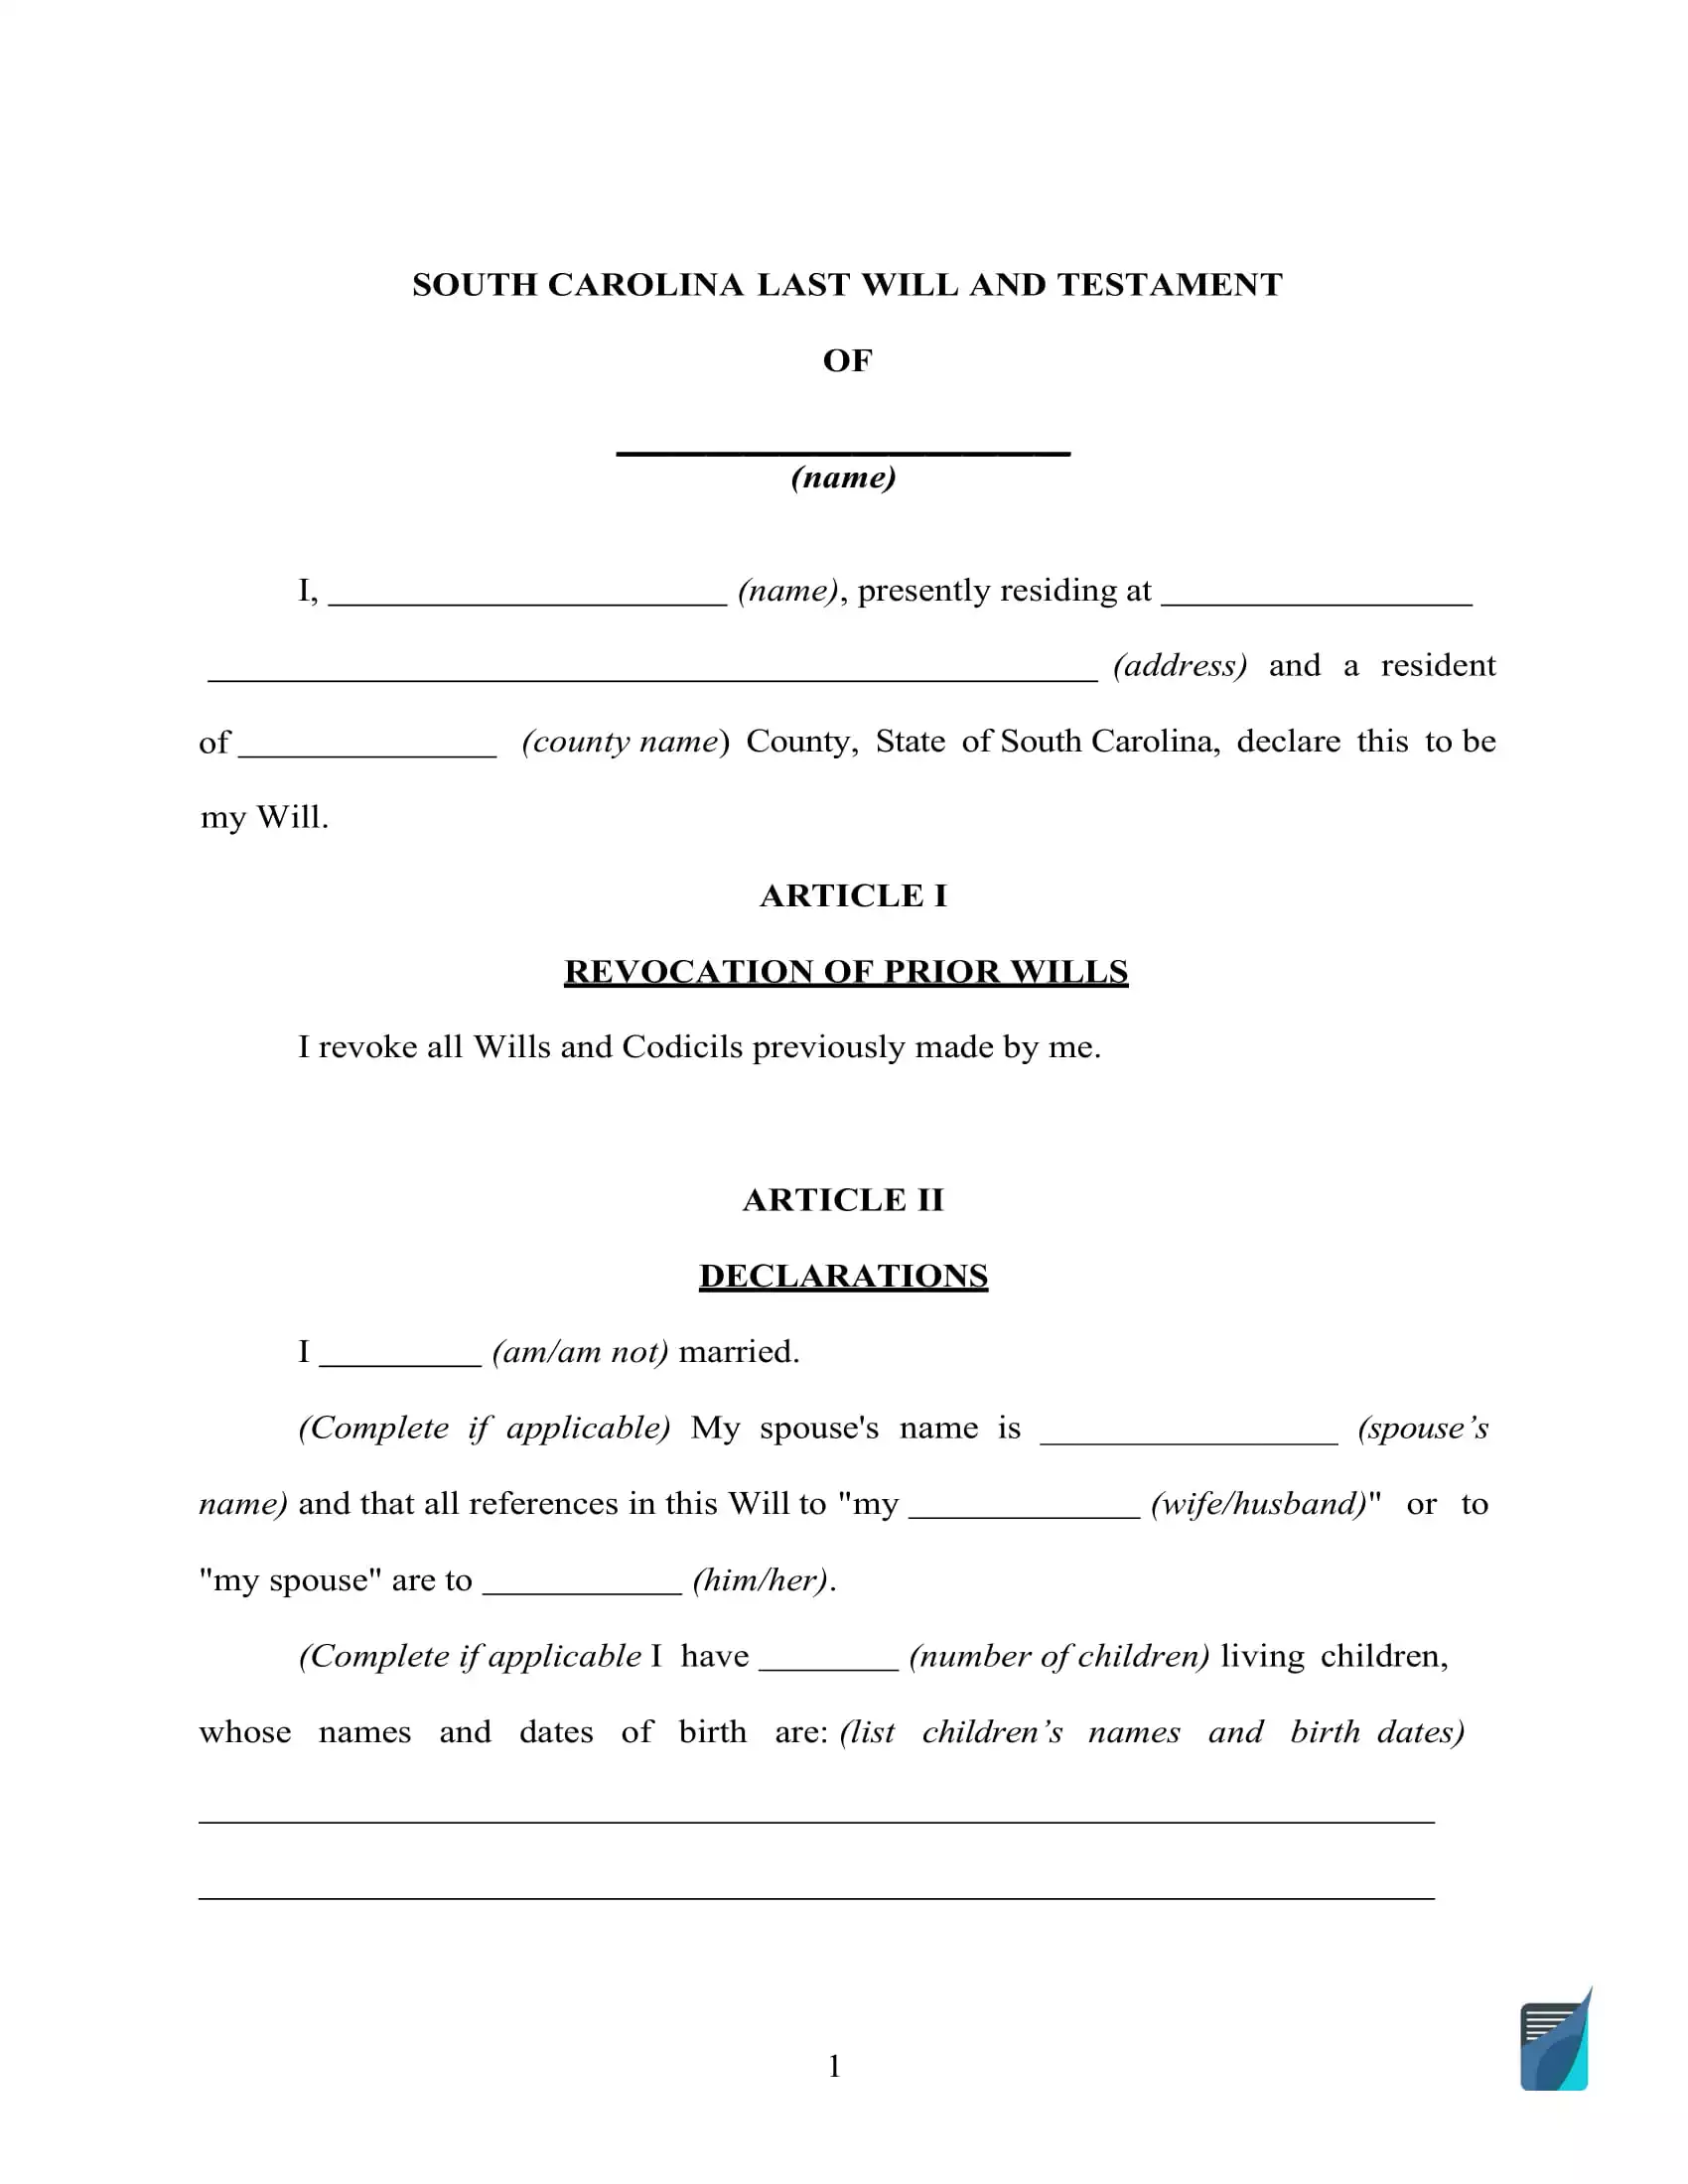 south-carolina-last-will-and-testament-template